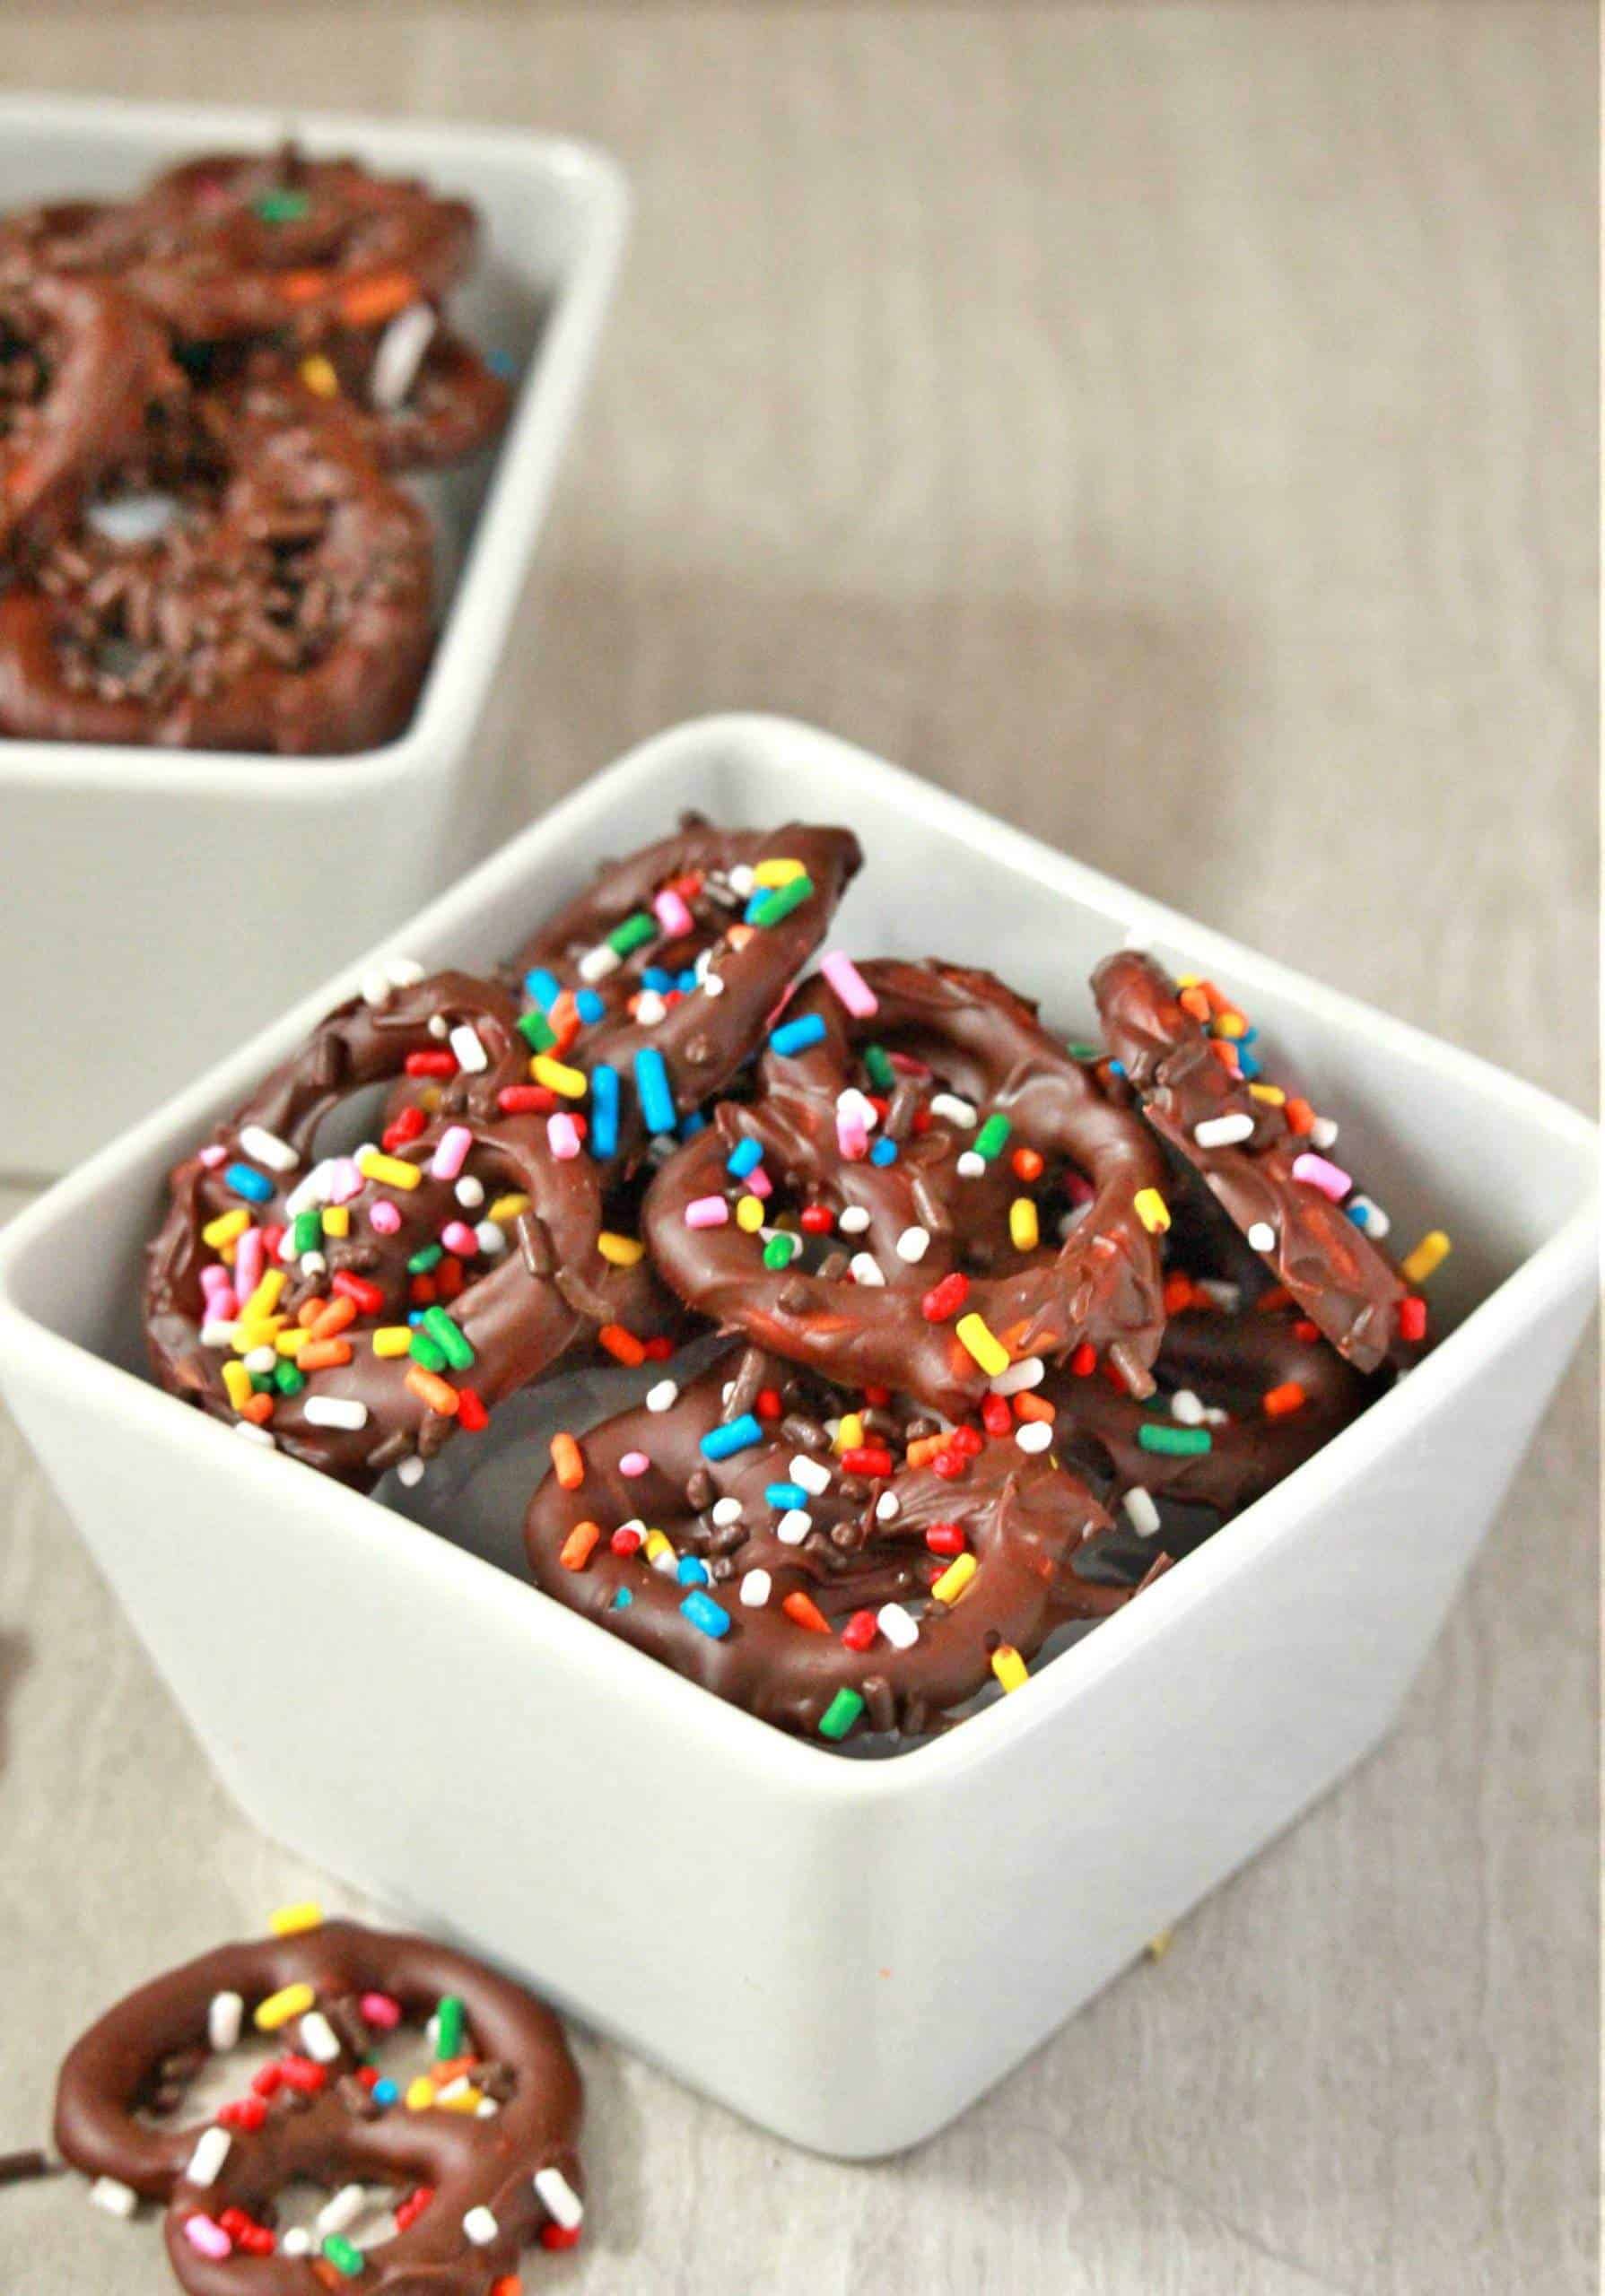 3 Ingredient Chocolate Covered Pretzels - My Cooking Journey